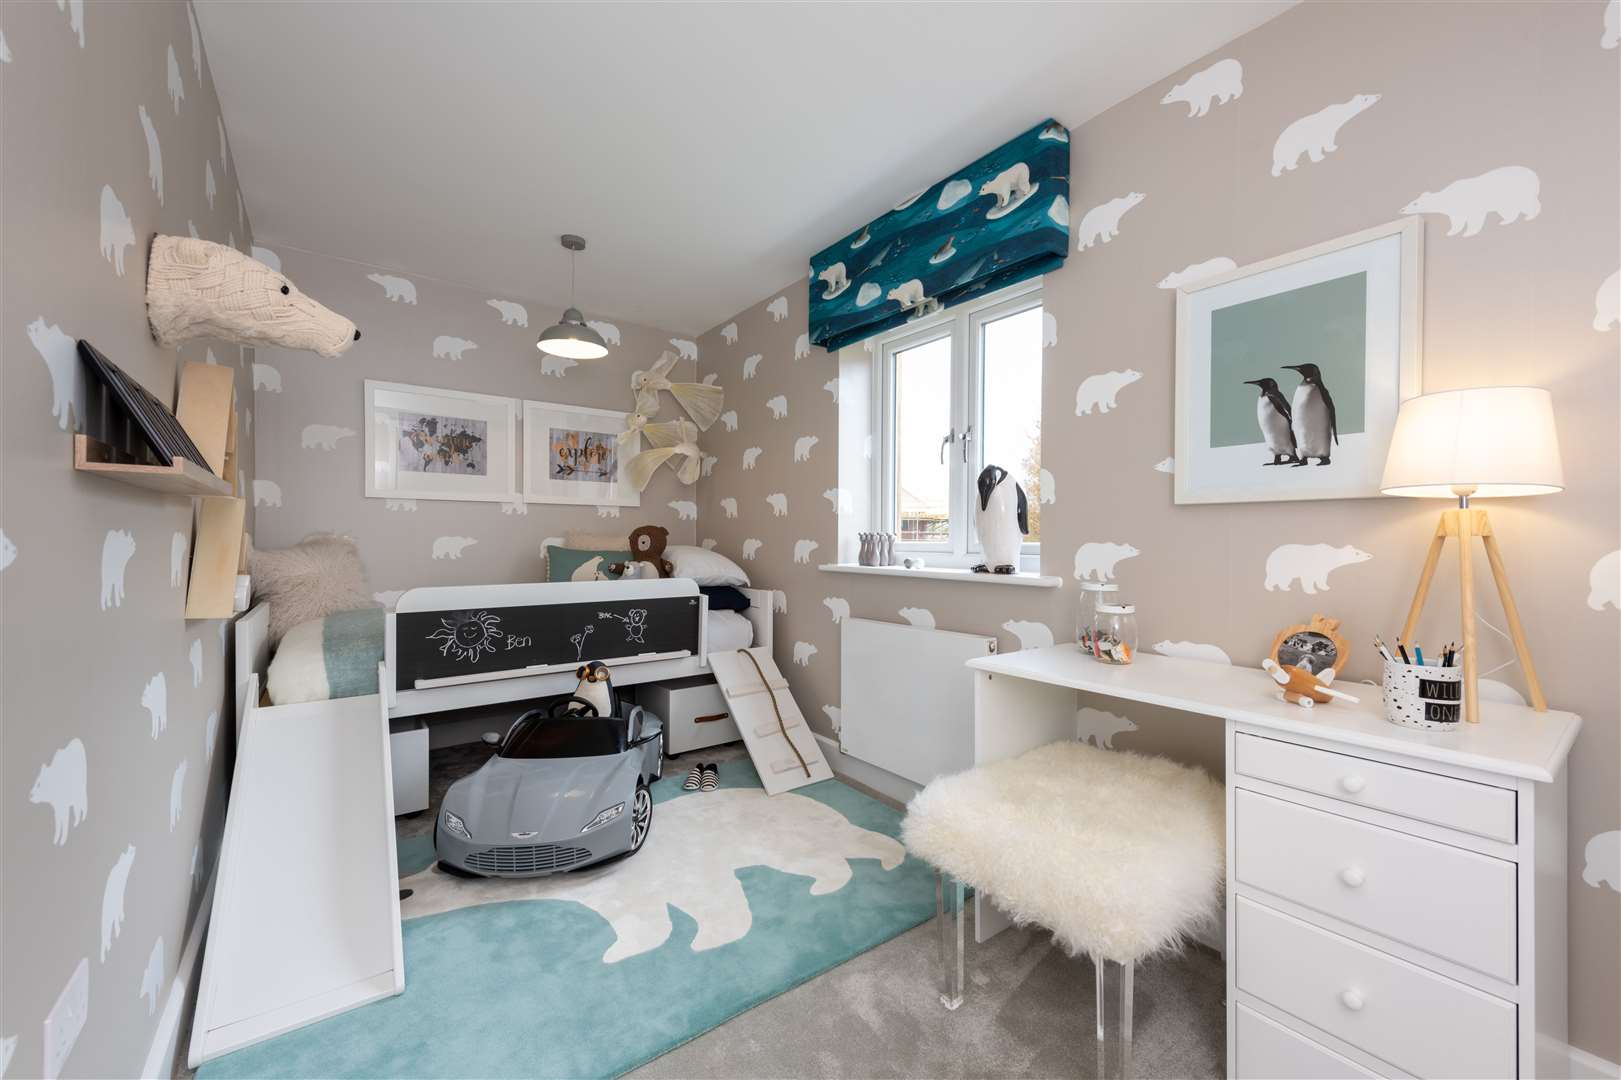 Pentland Homes' interiors at Radstone Gate with a polar bear themed bedroom